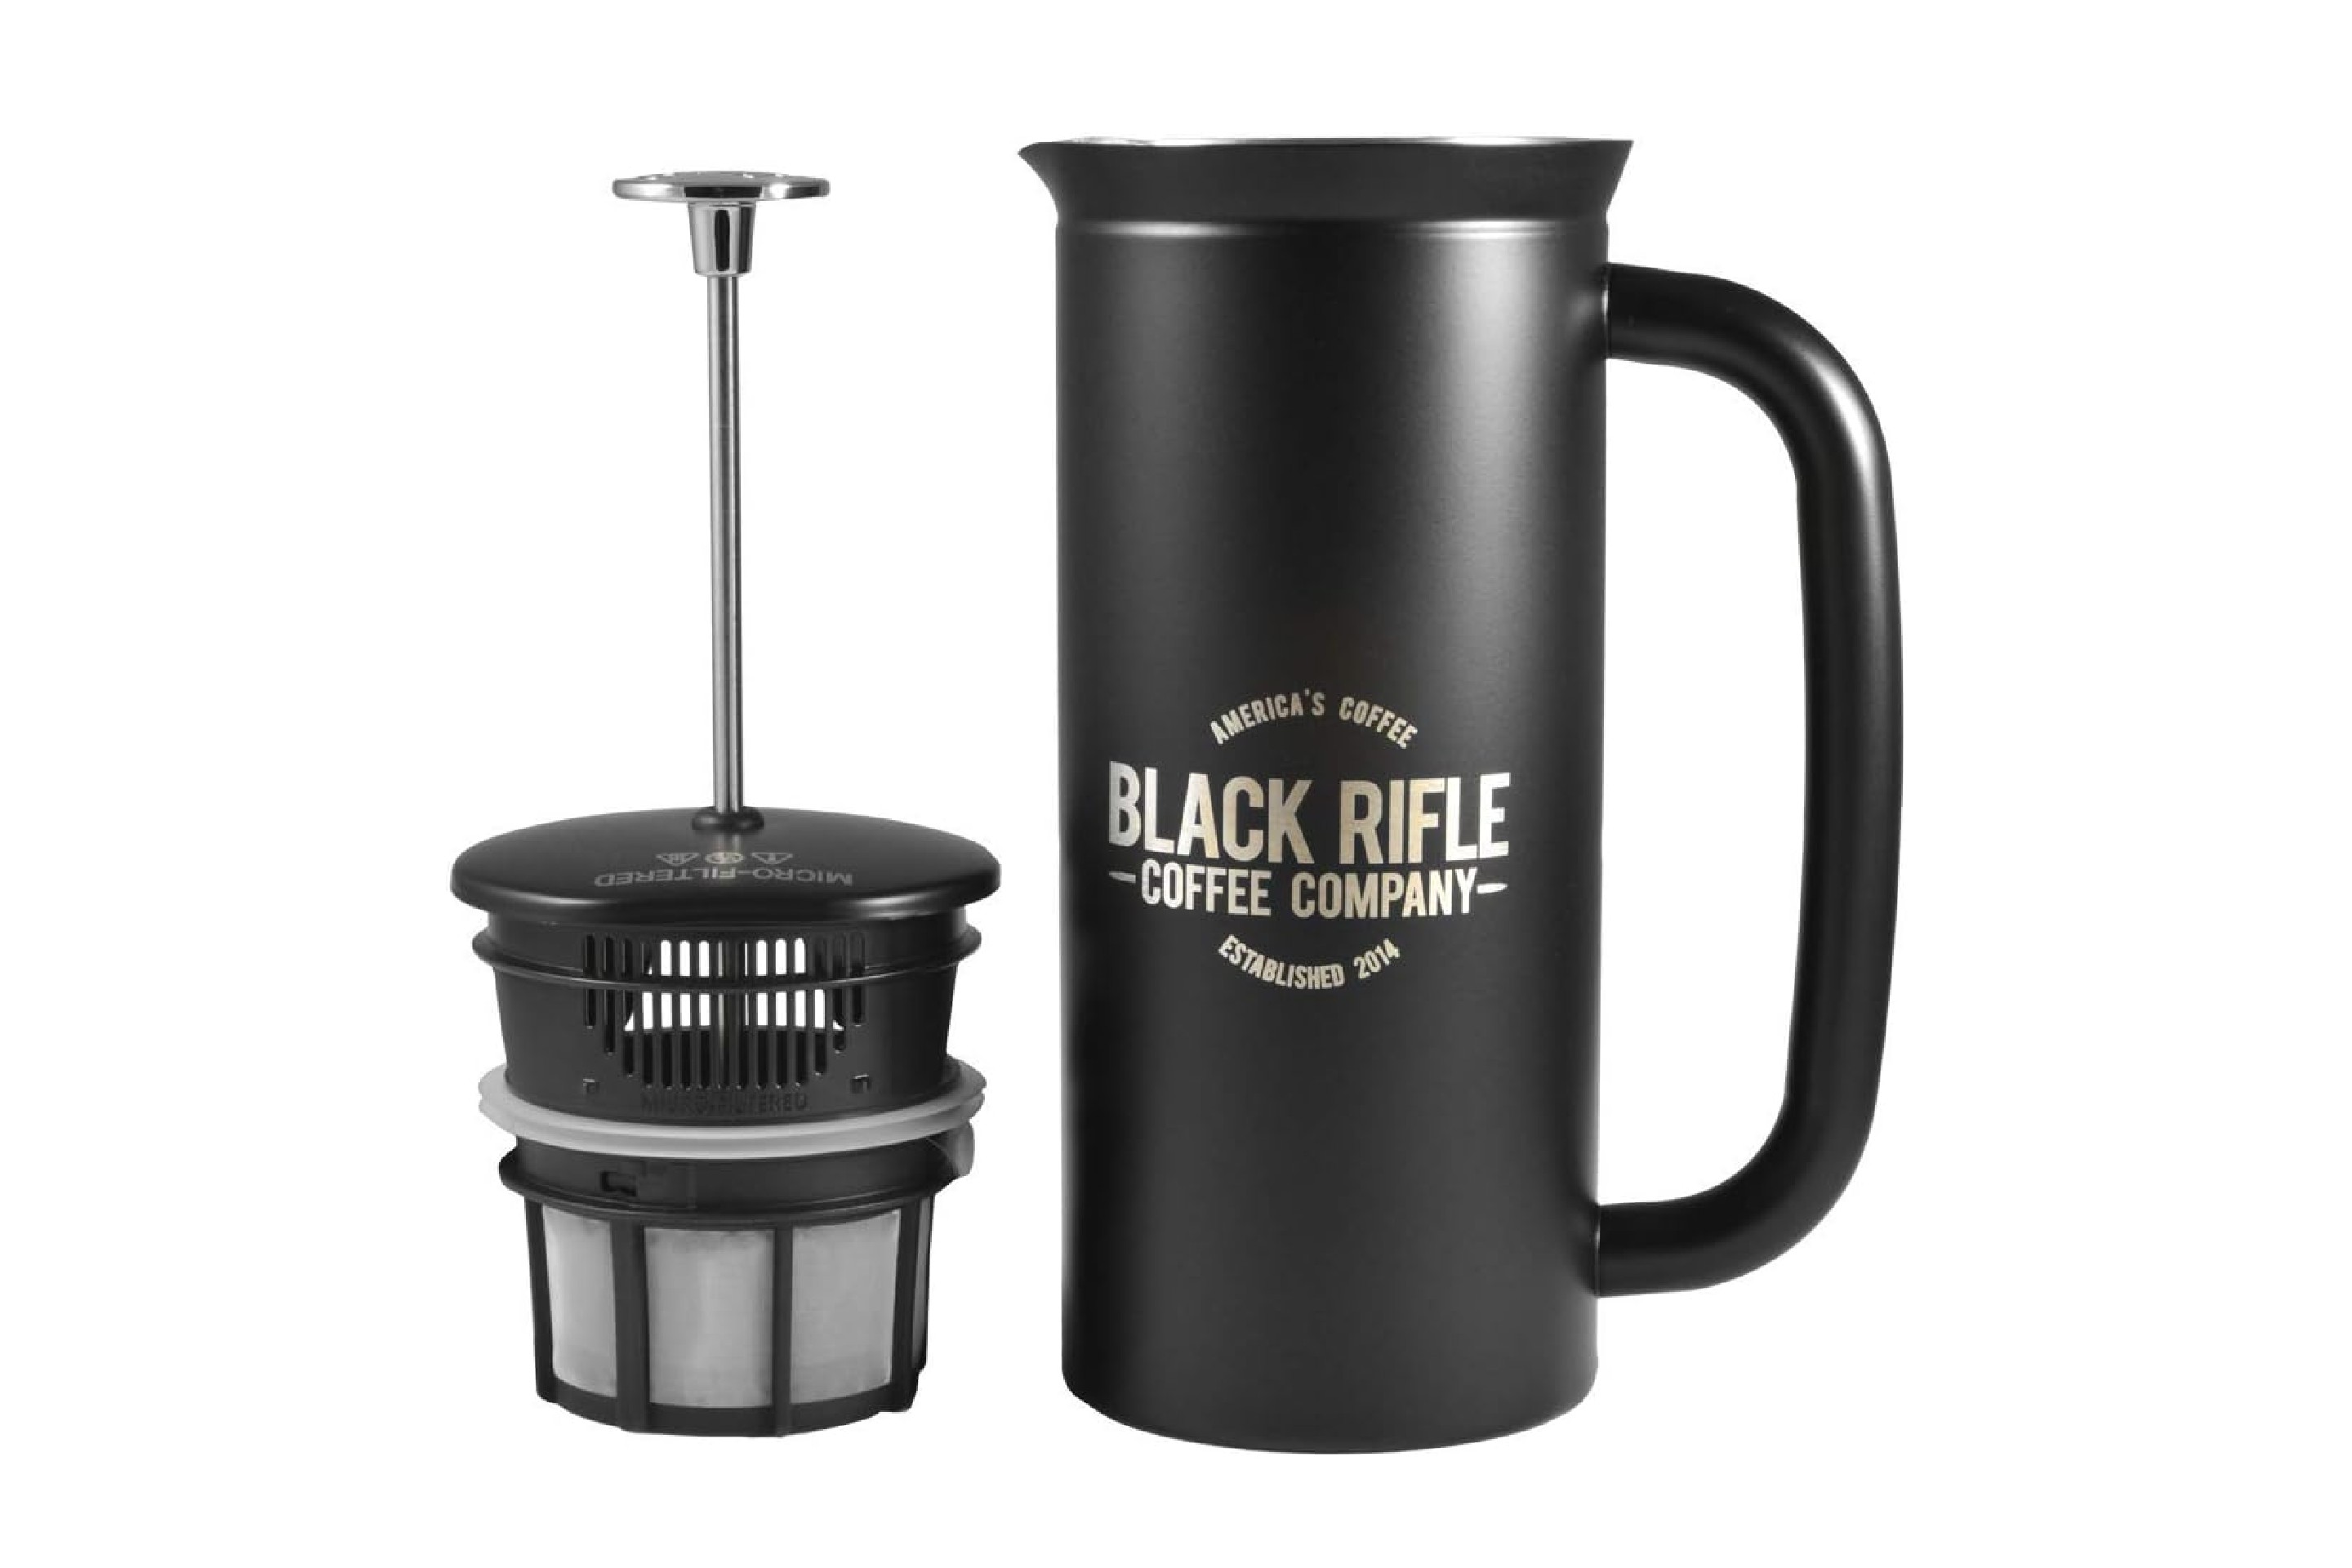 The COLETTI Boulder - 10 Cup Insulated French Press Coffee Maker